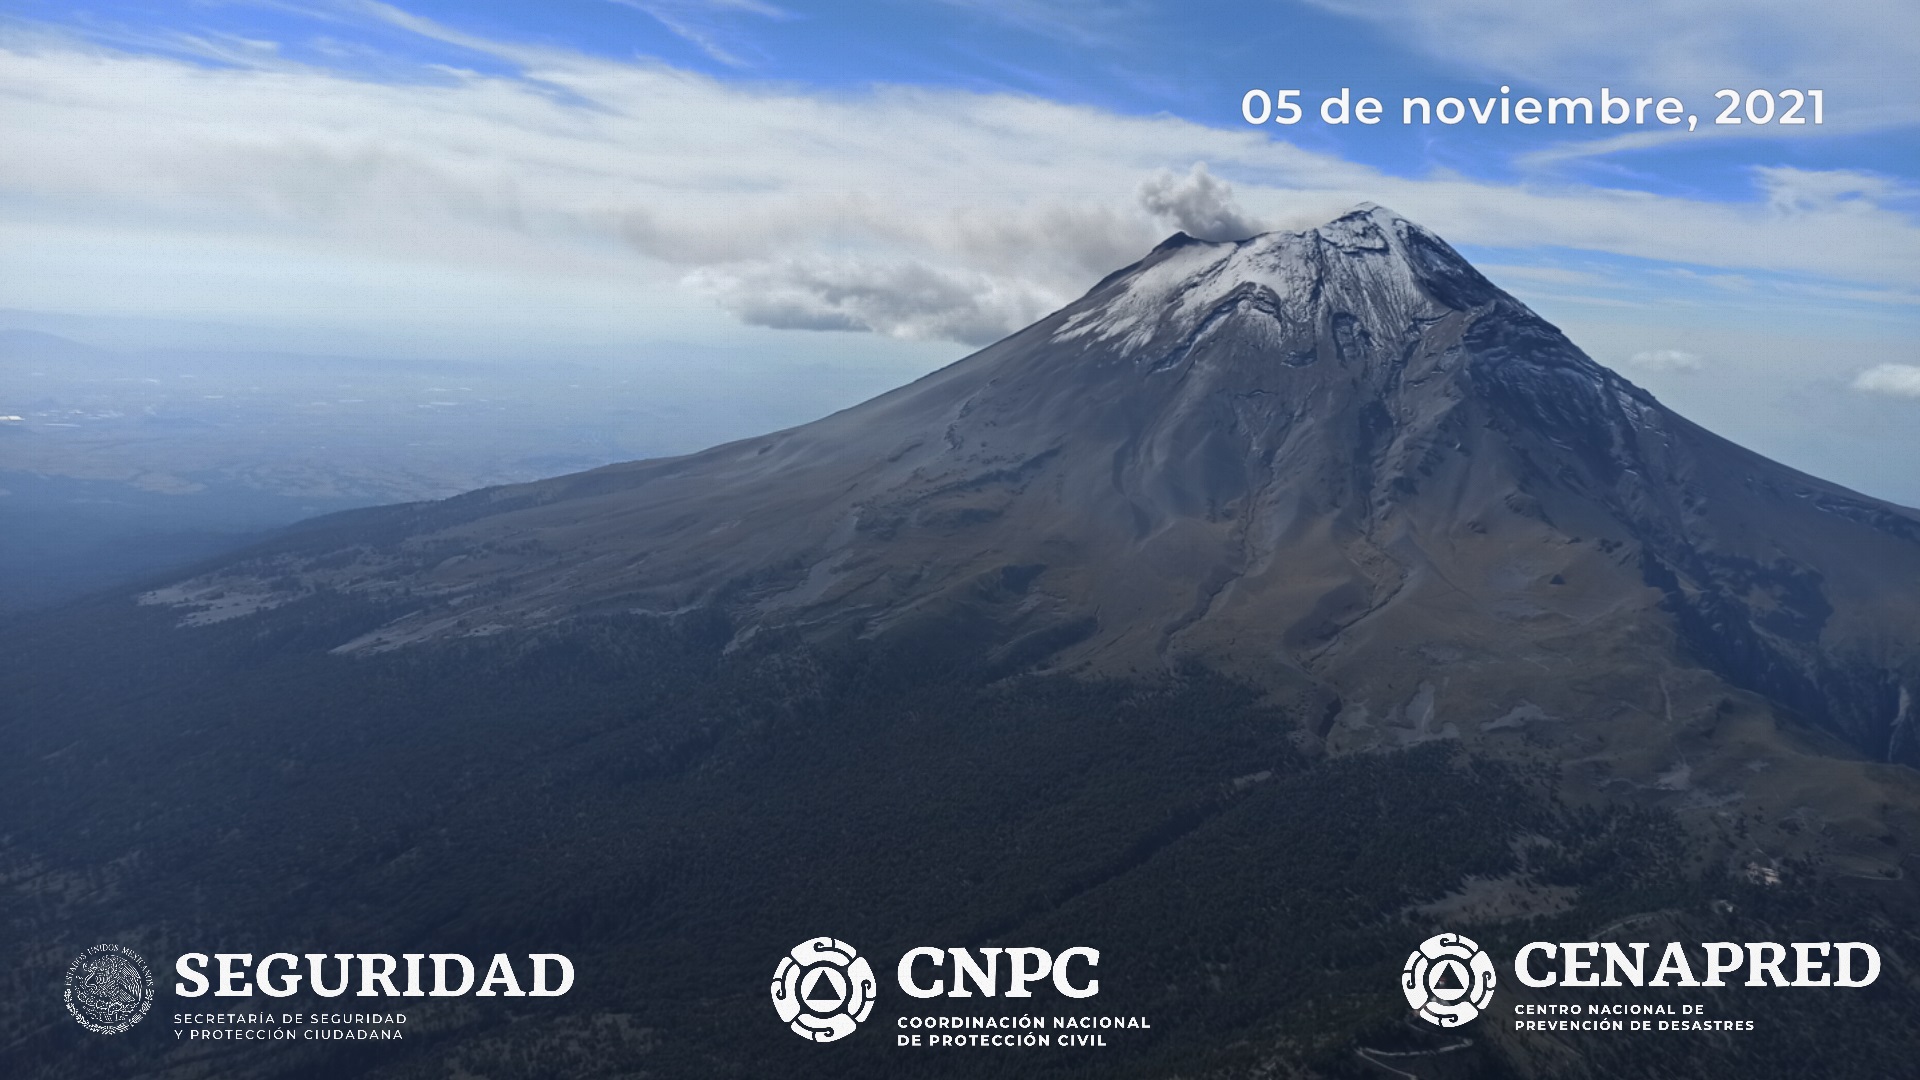 Gas and ash emissions from Popocatépetl volcano, the image taken during the overflight (image: CENAPRED)